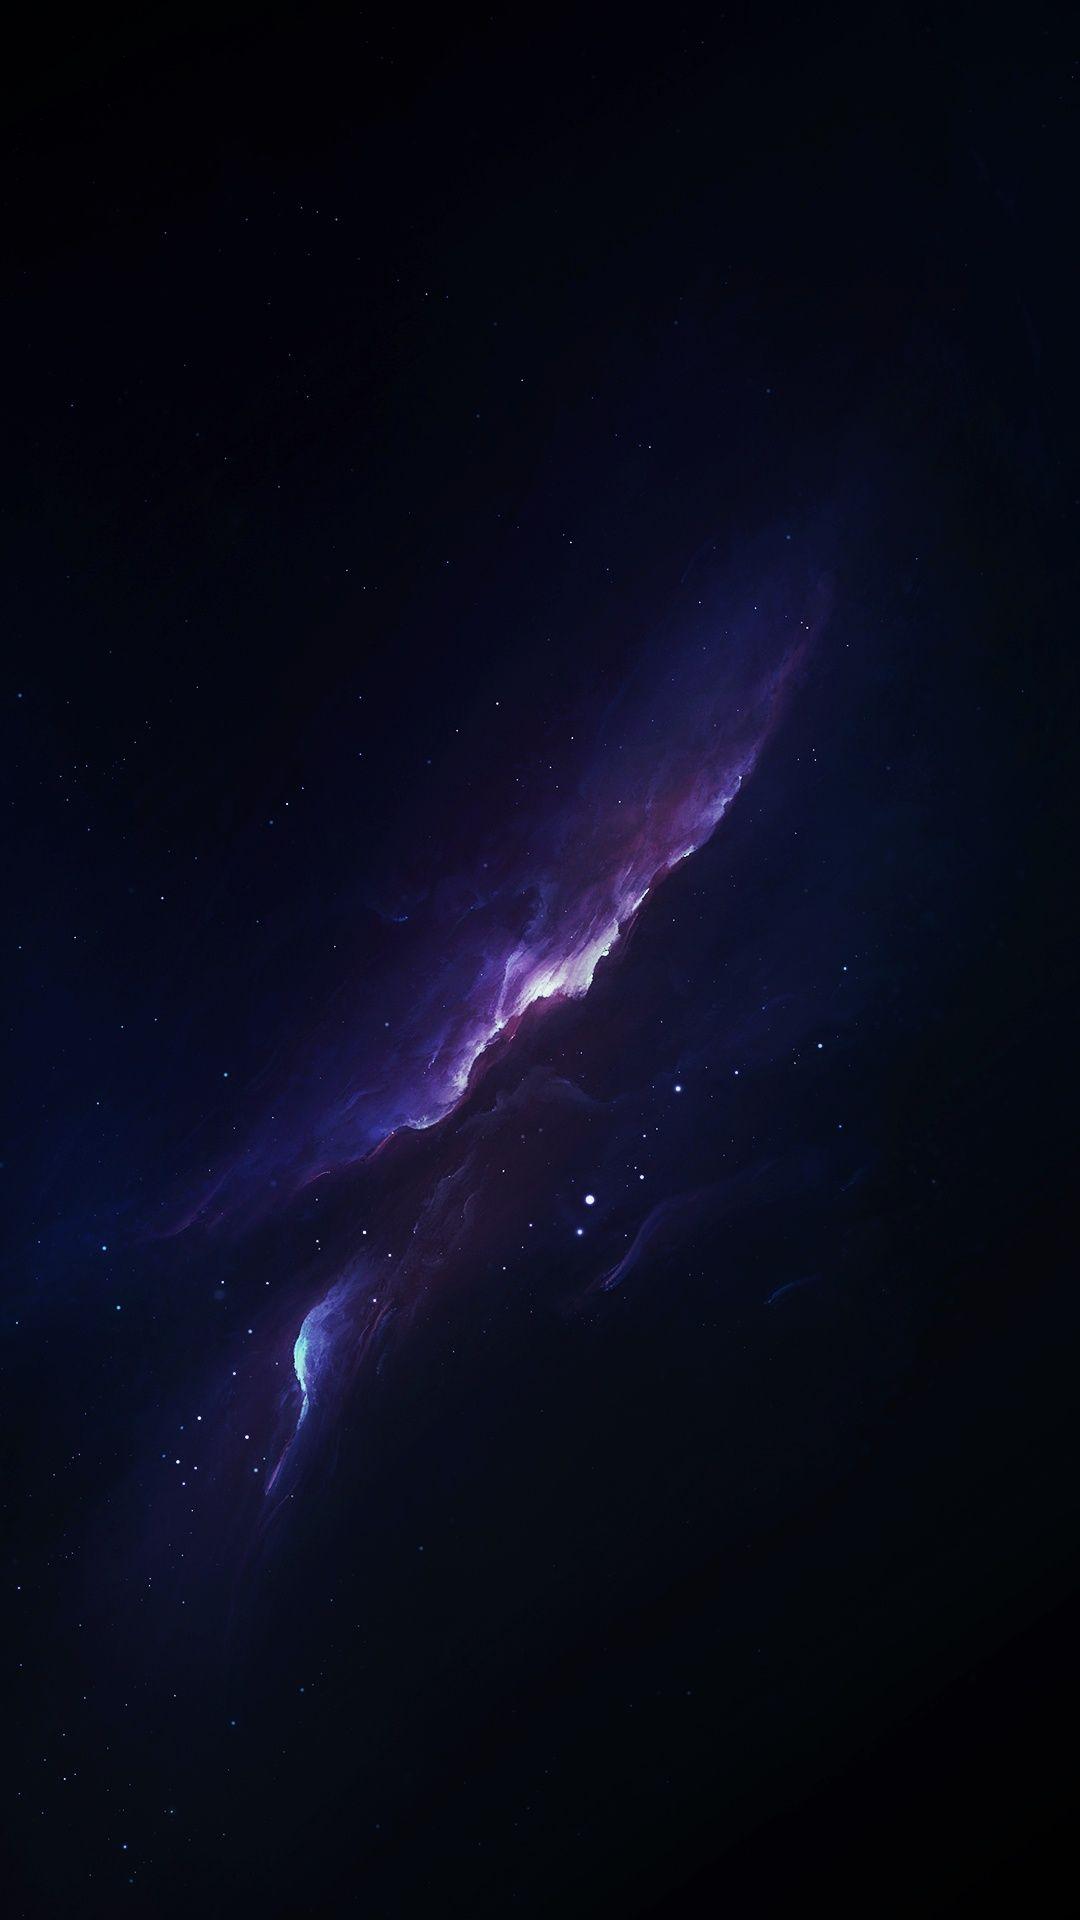 Space wallpaper wallpaper iphone android  Wallpaper space Iphone  wallpaper sky Android wallpaper space